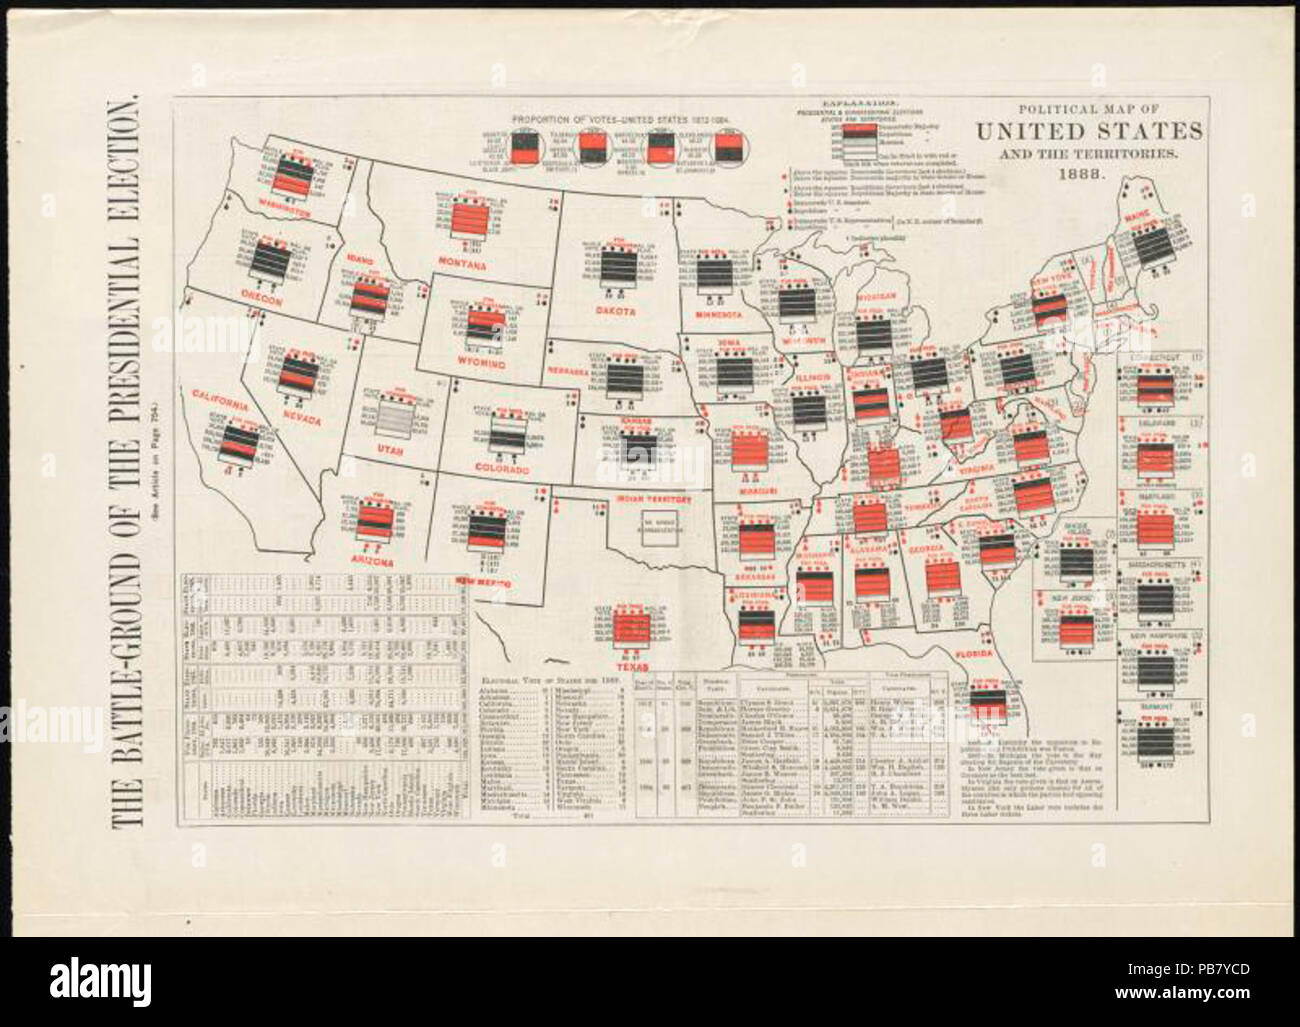 1209 Political map of the United States and territories. 1888 (10294211894) Stock Photo